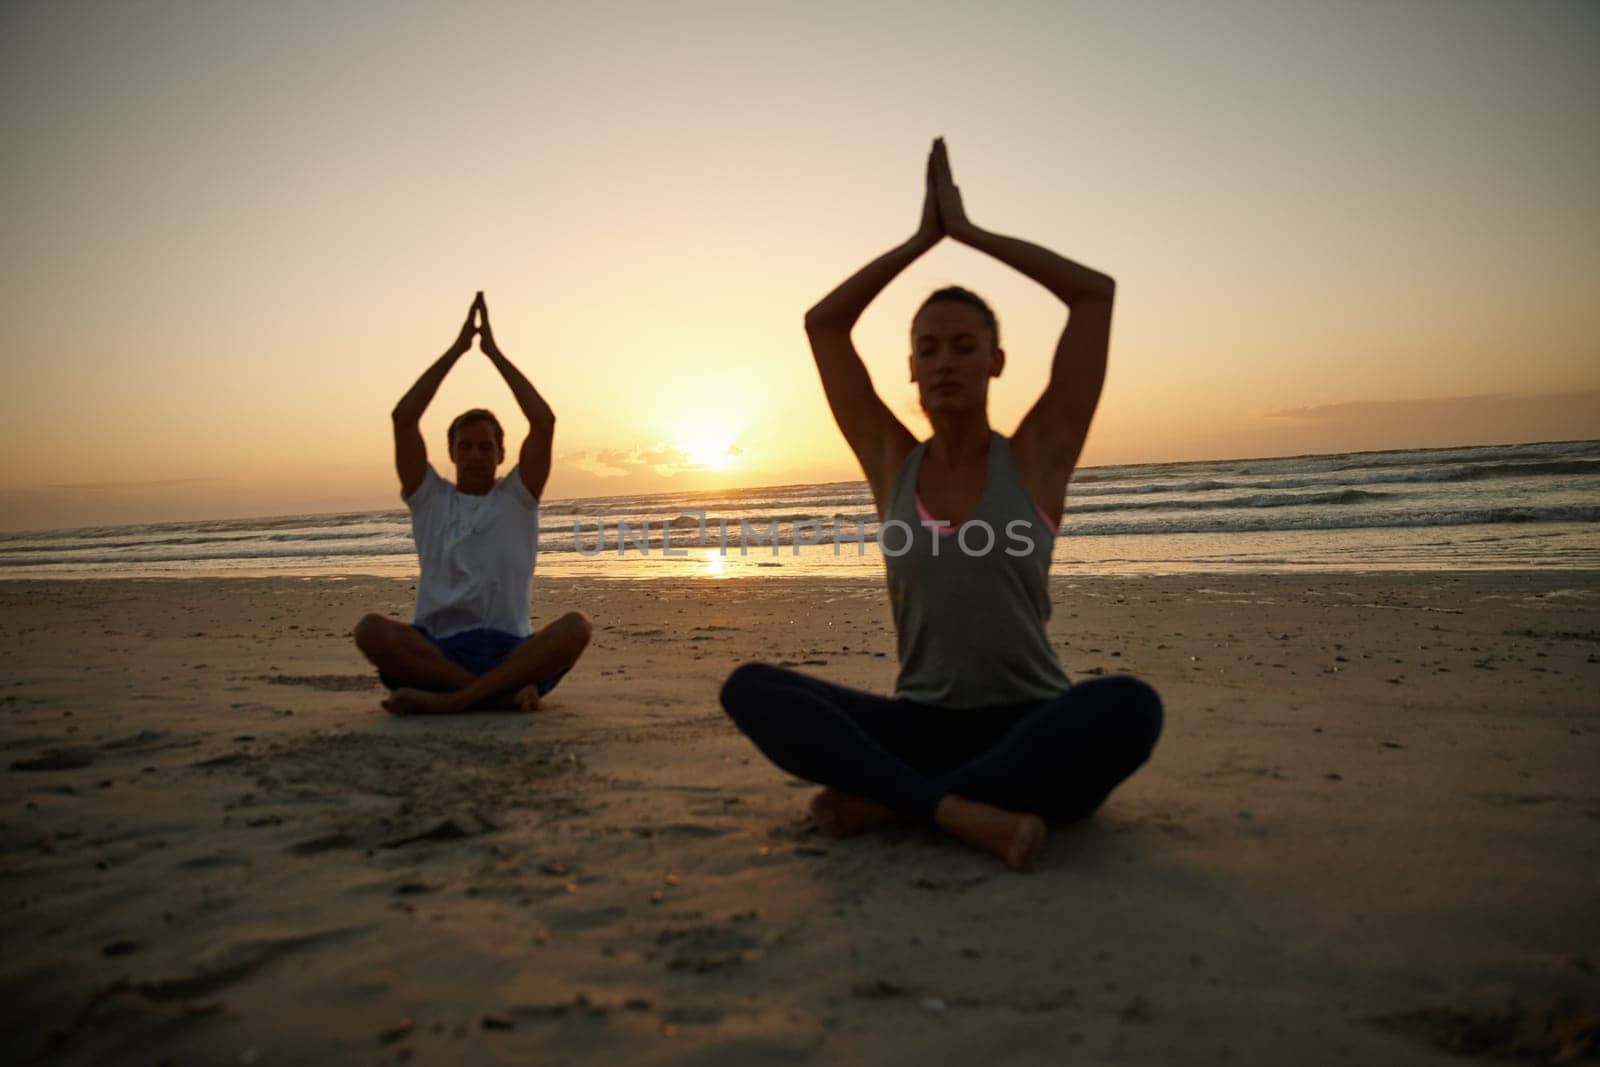 Tranquility by the ocean. a couple doing yoga on the beach at sunset. by YuriArcurs